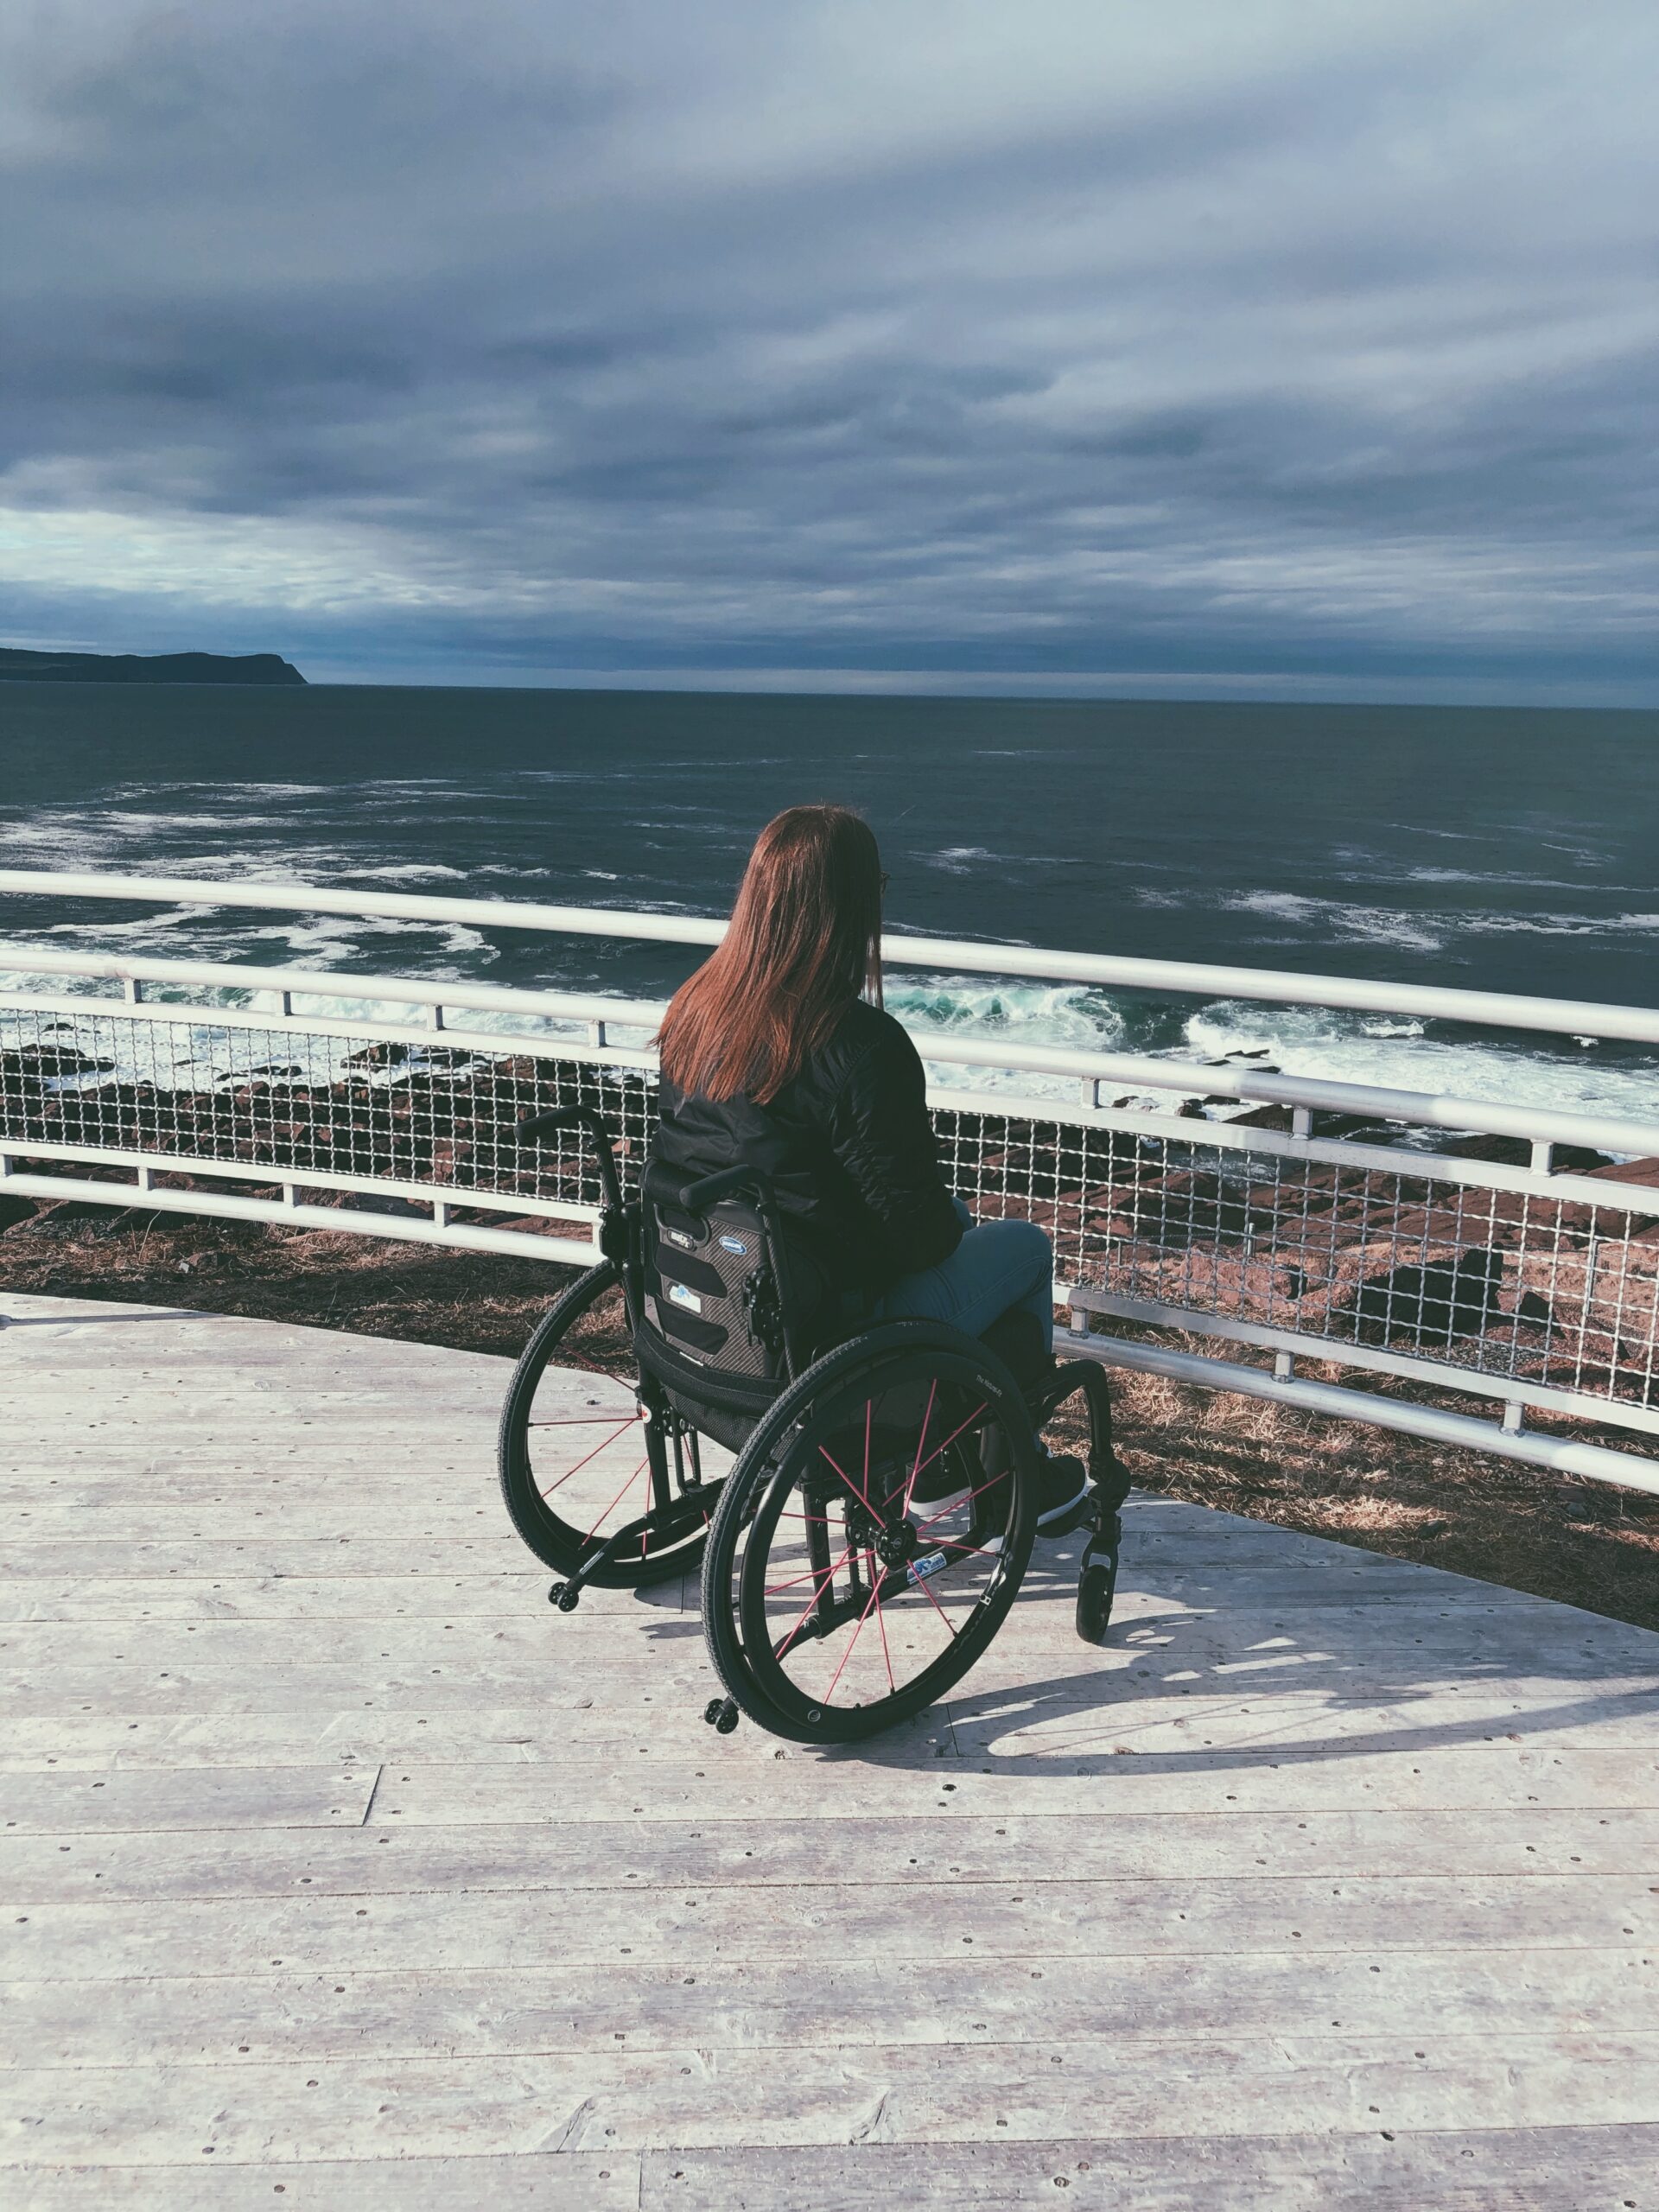 A photo of me from behind, sitting in my wheelchair on a different observation deck near the end of the trail. There are rails in front of me and then cliffs and ocean beyond. 